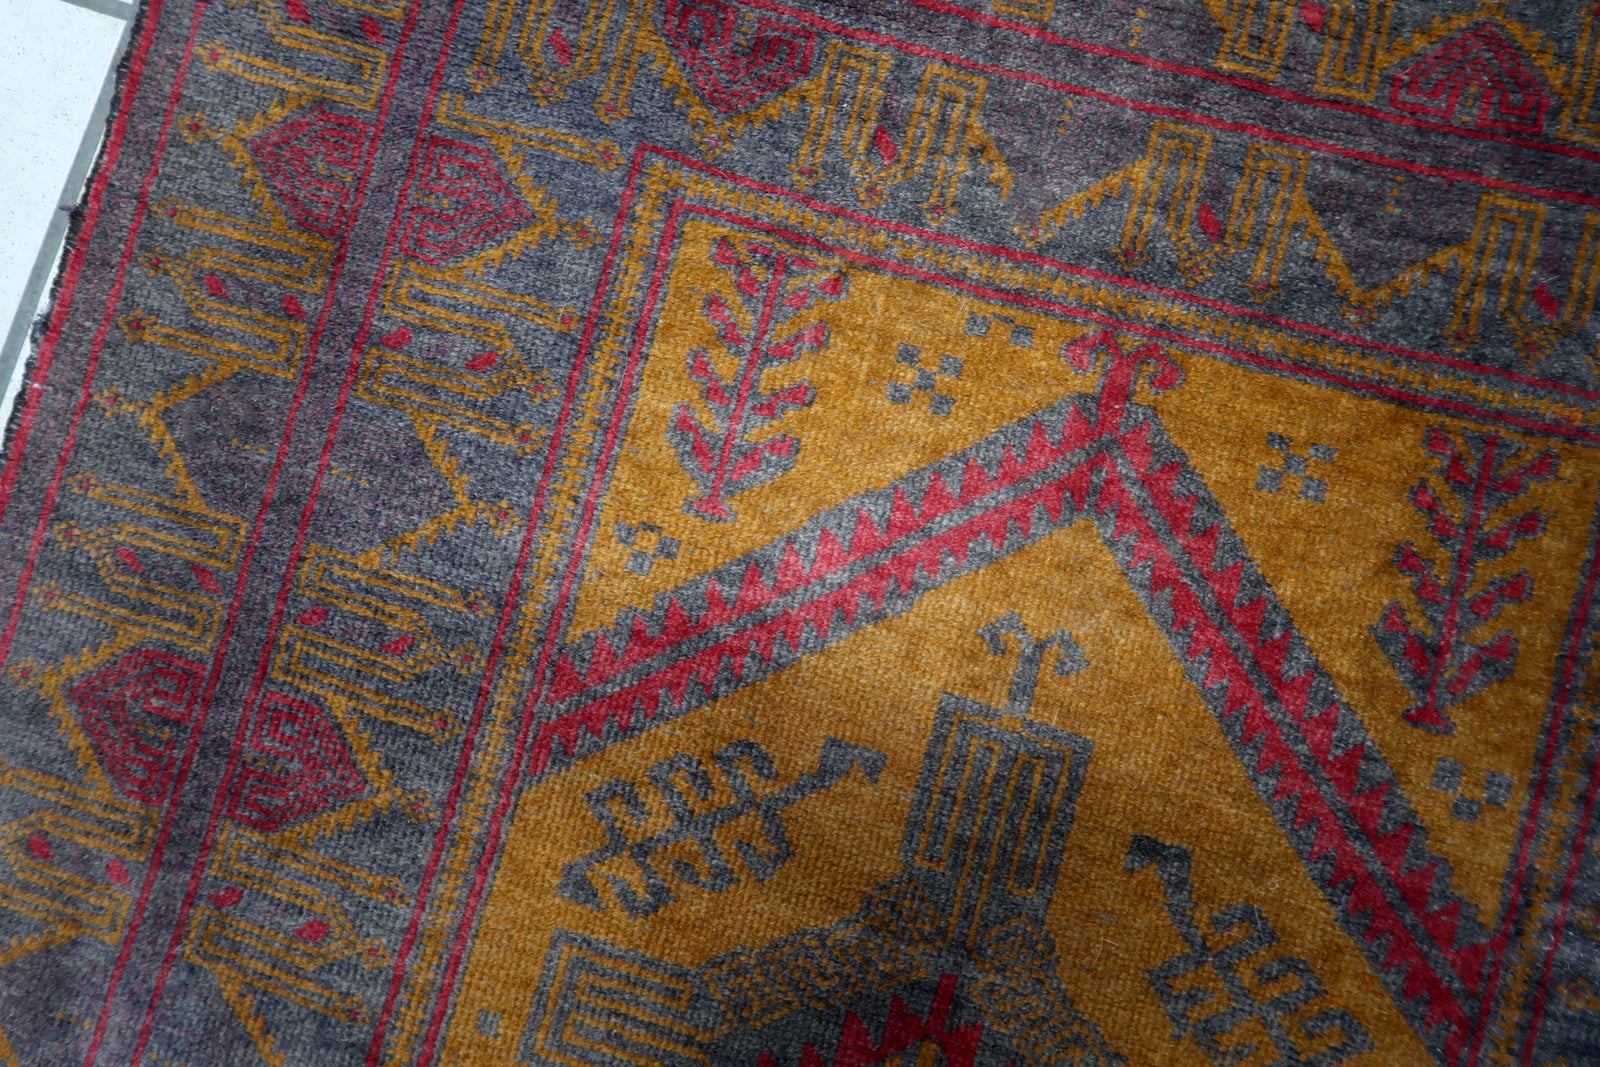 Close-up of the vibrant fuchsia color on the Afghan Baluch rug